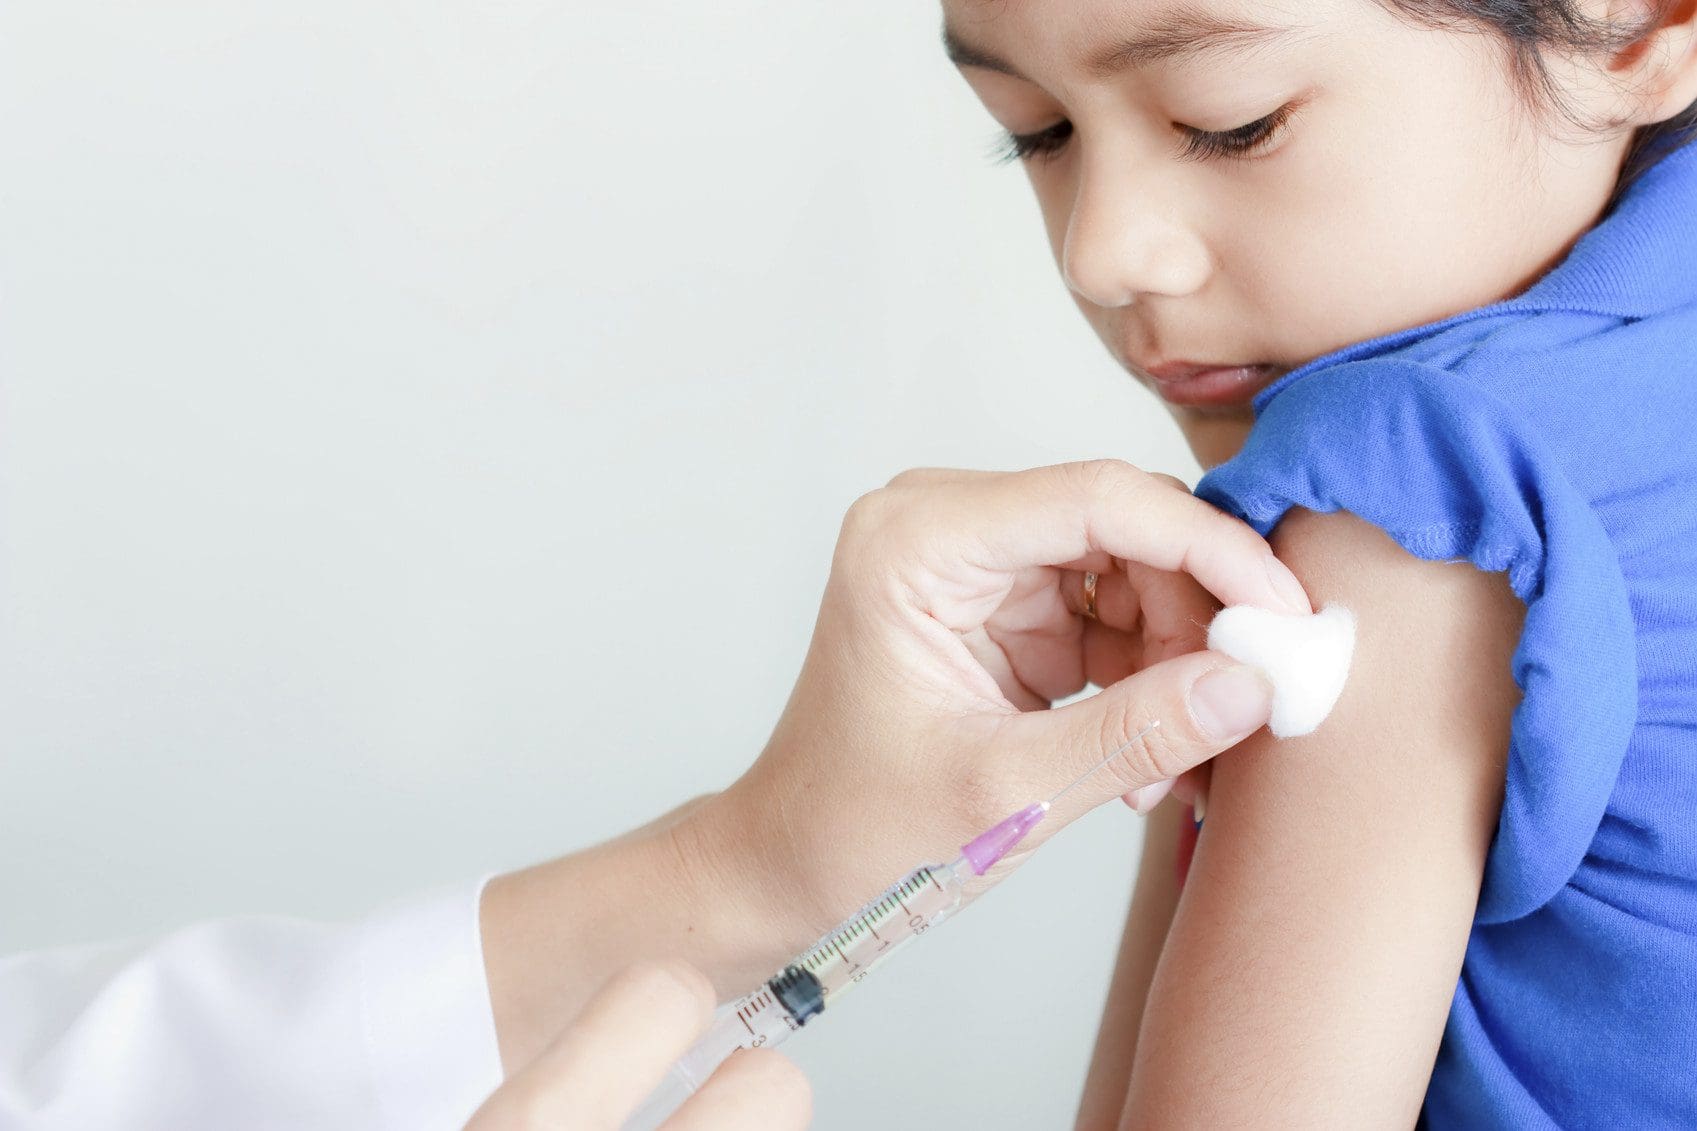 doctors-push-hard-for-child-vaccination-despite-their-own-research-showing-it-is-unnecessary